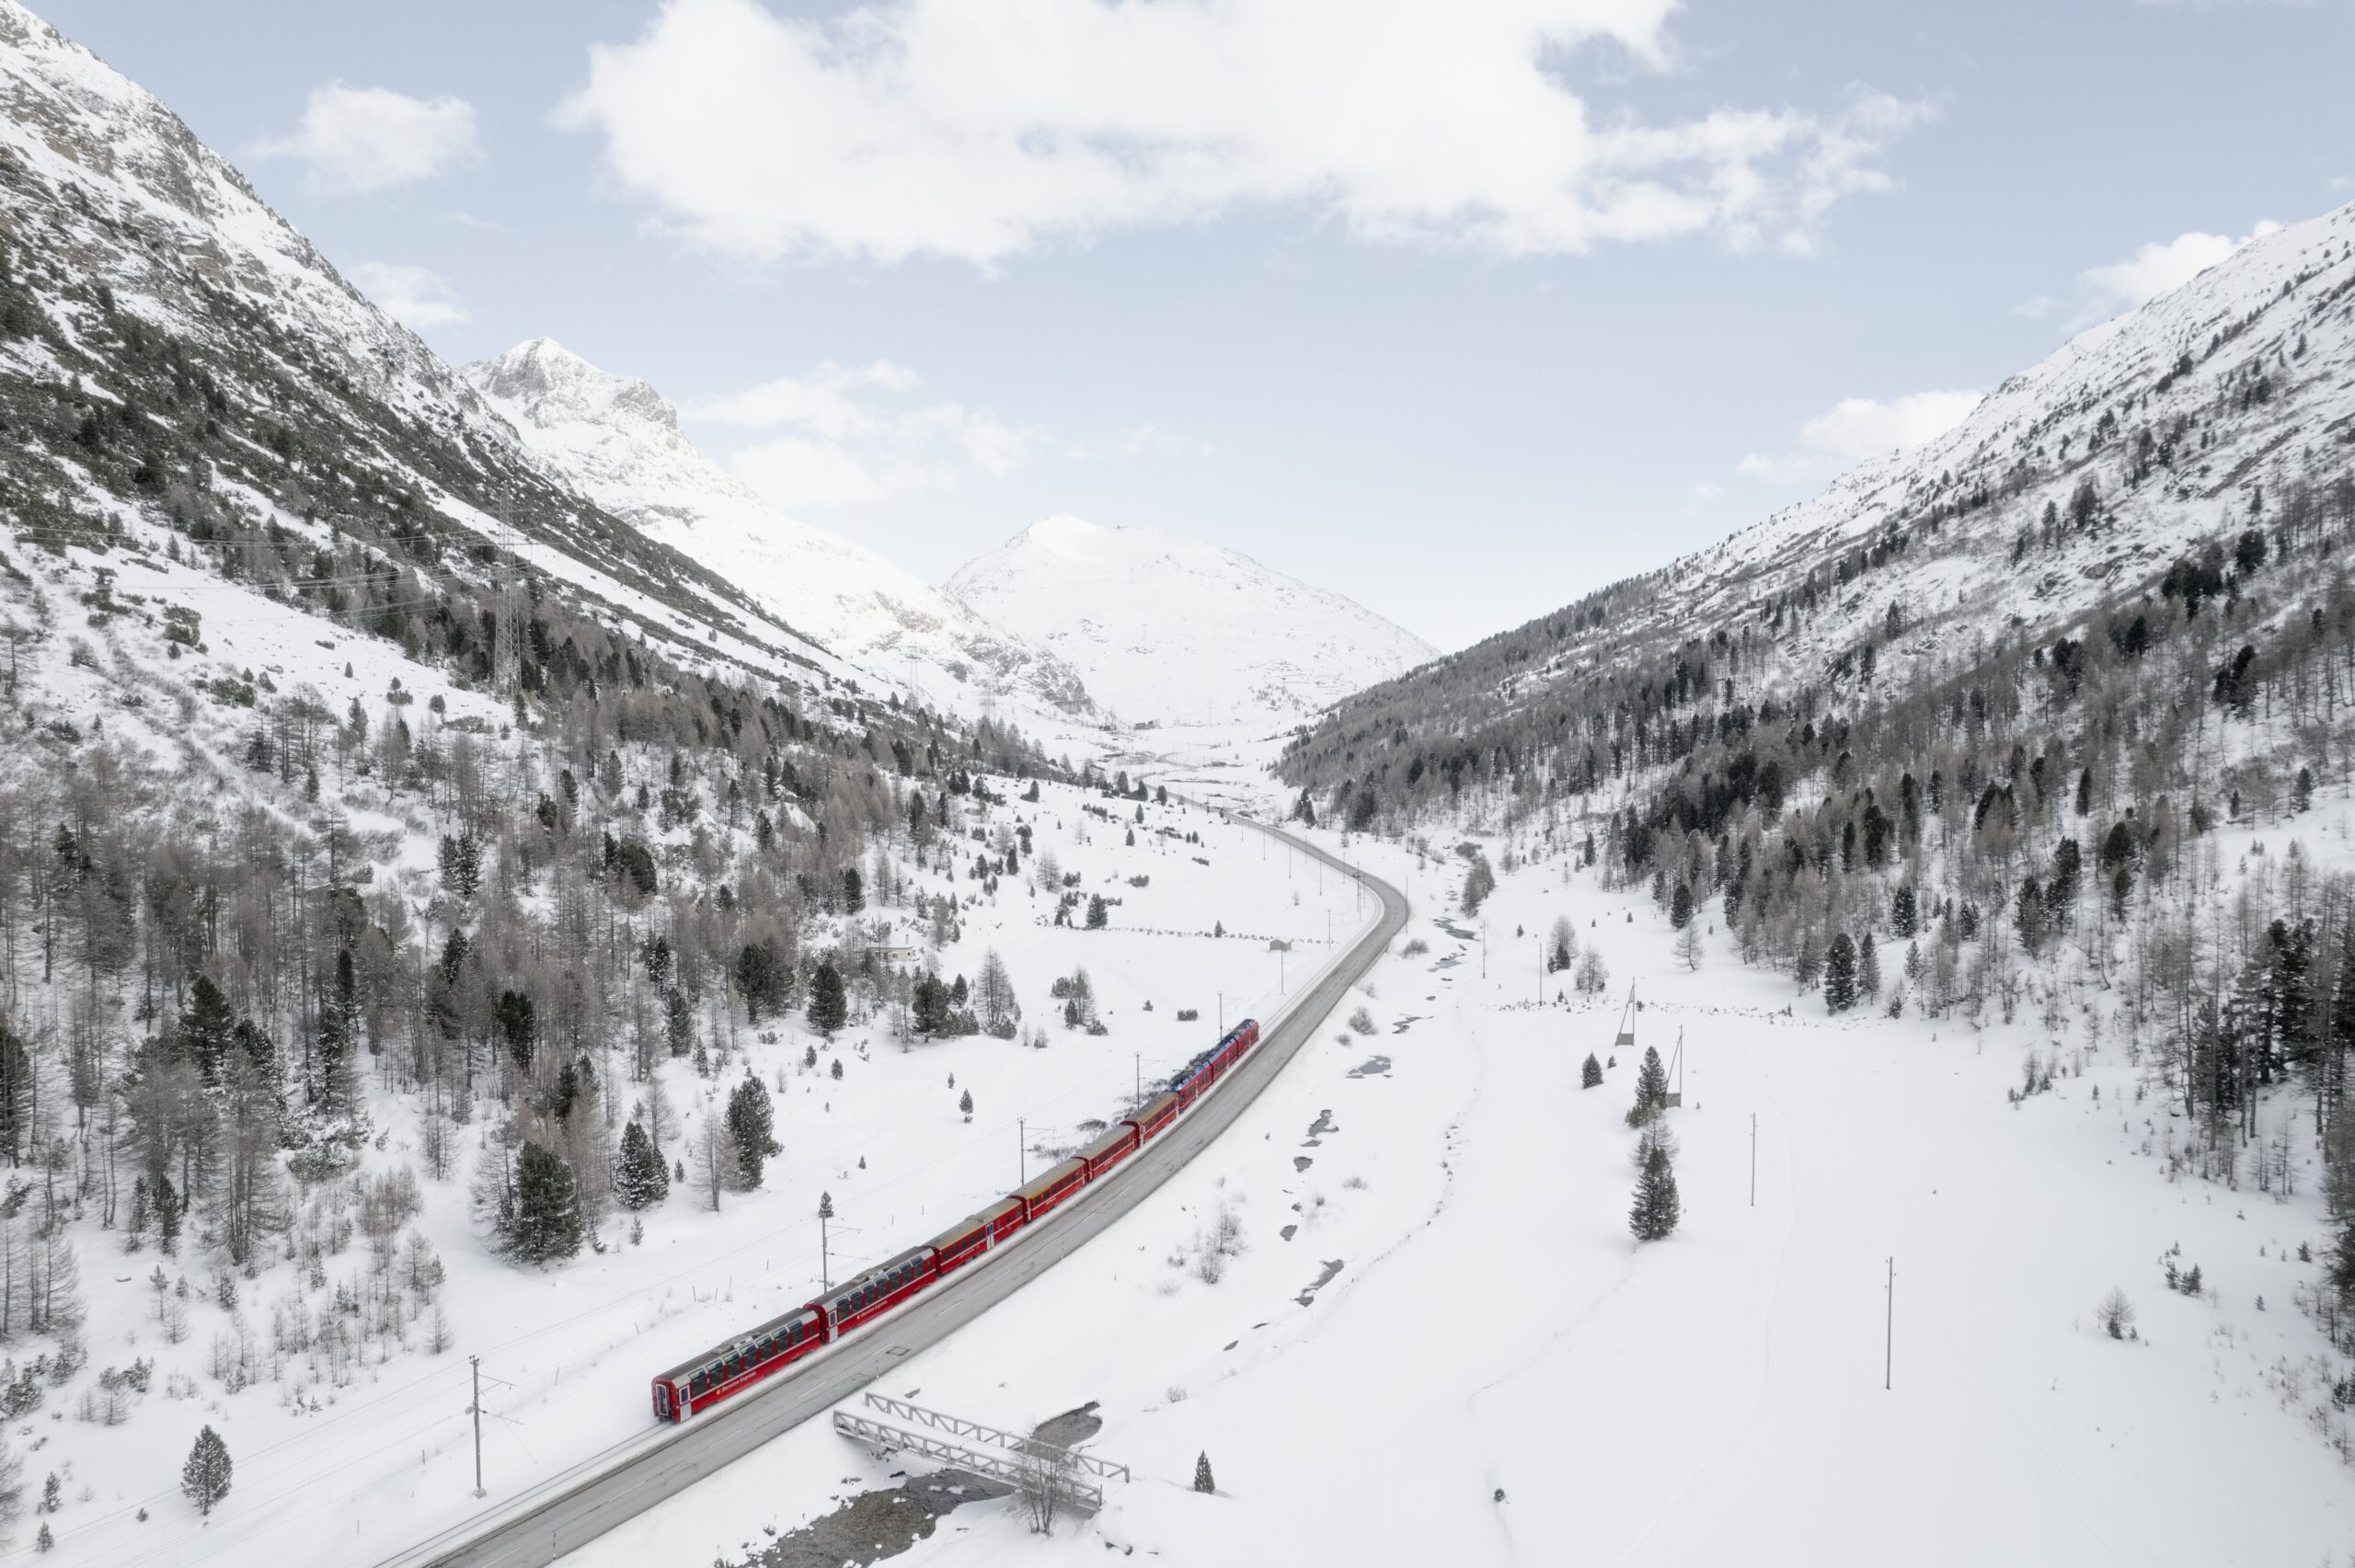 Take the train to the slopes of Europe's Alps in St Moritz.